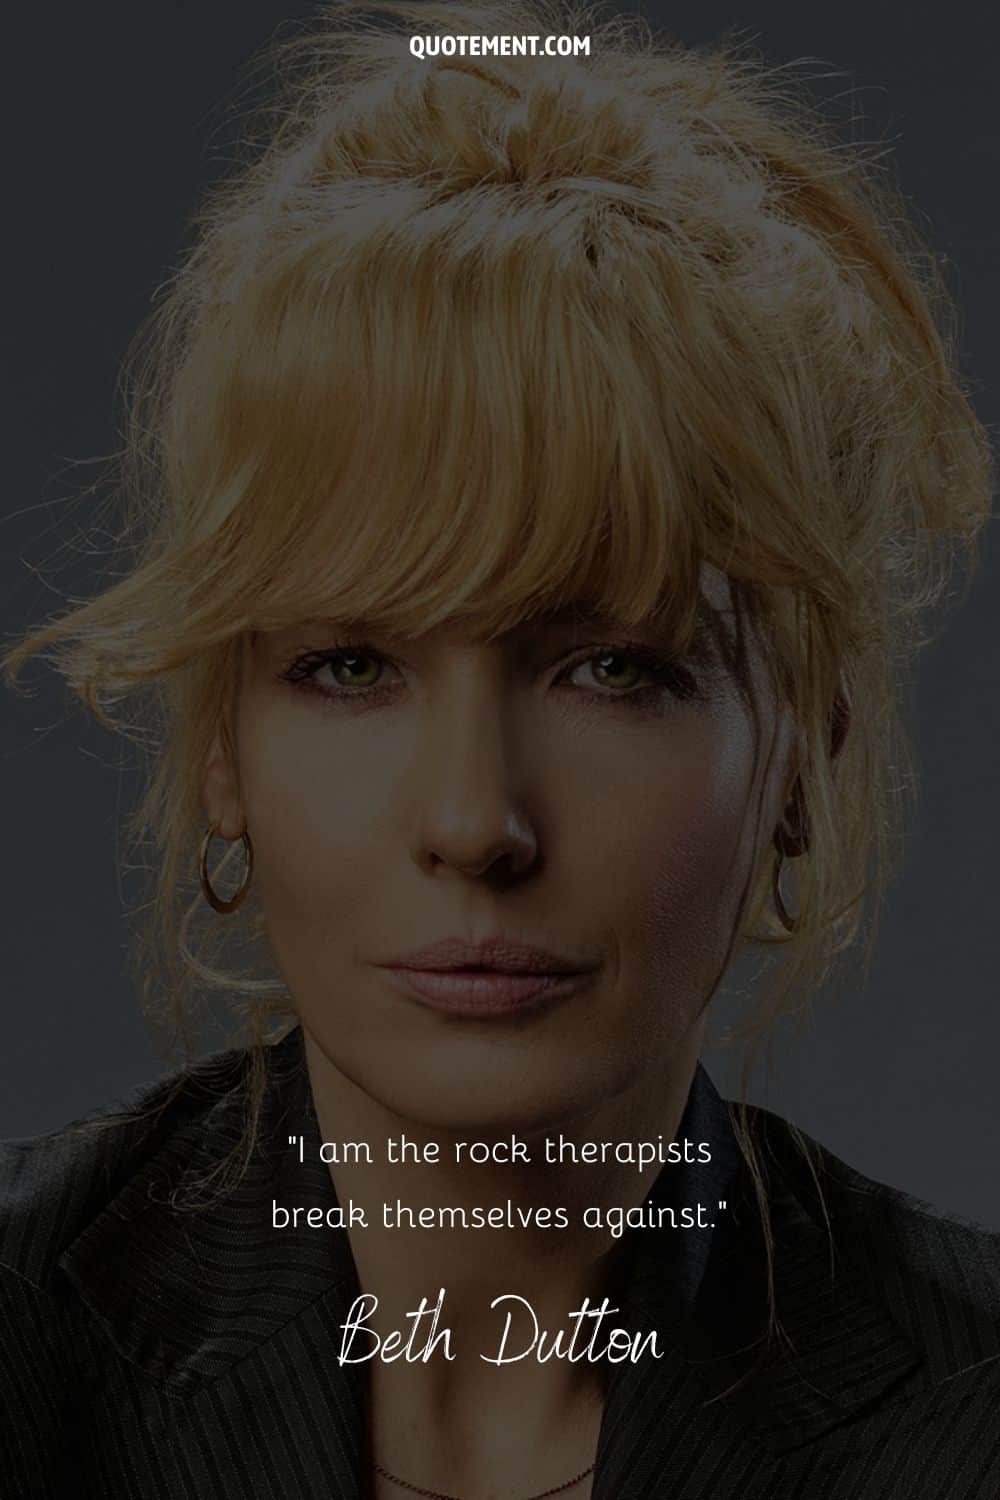 image of Beth Dutton representing the best Beth Dutton quote